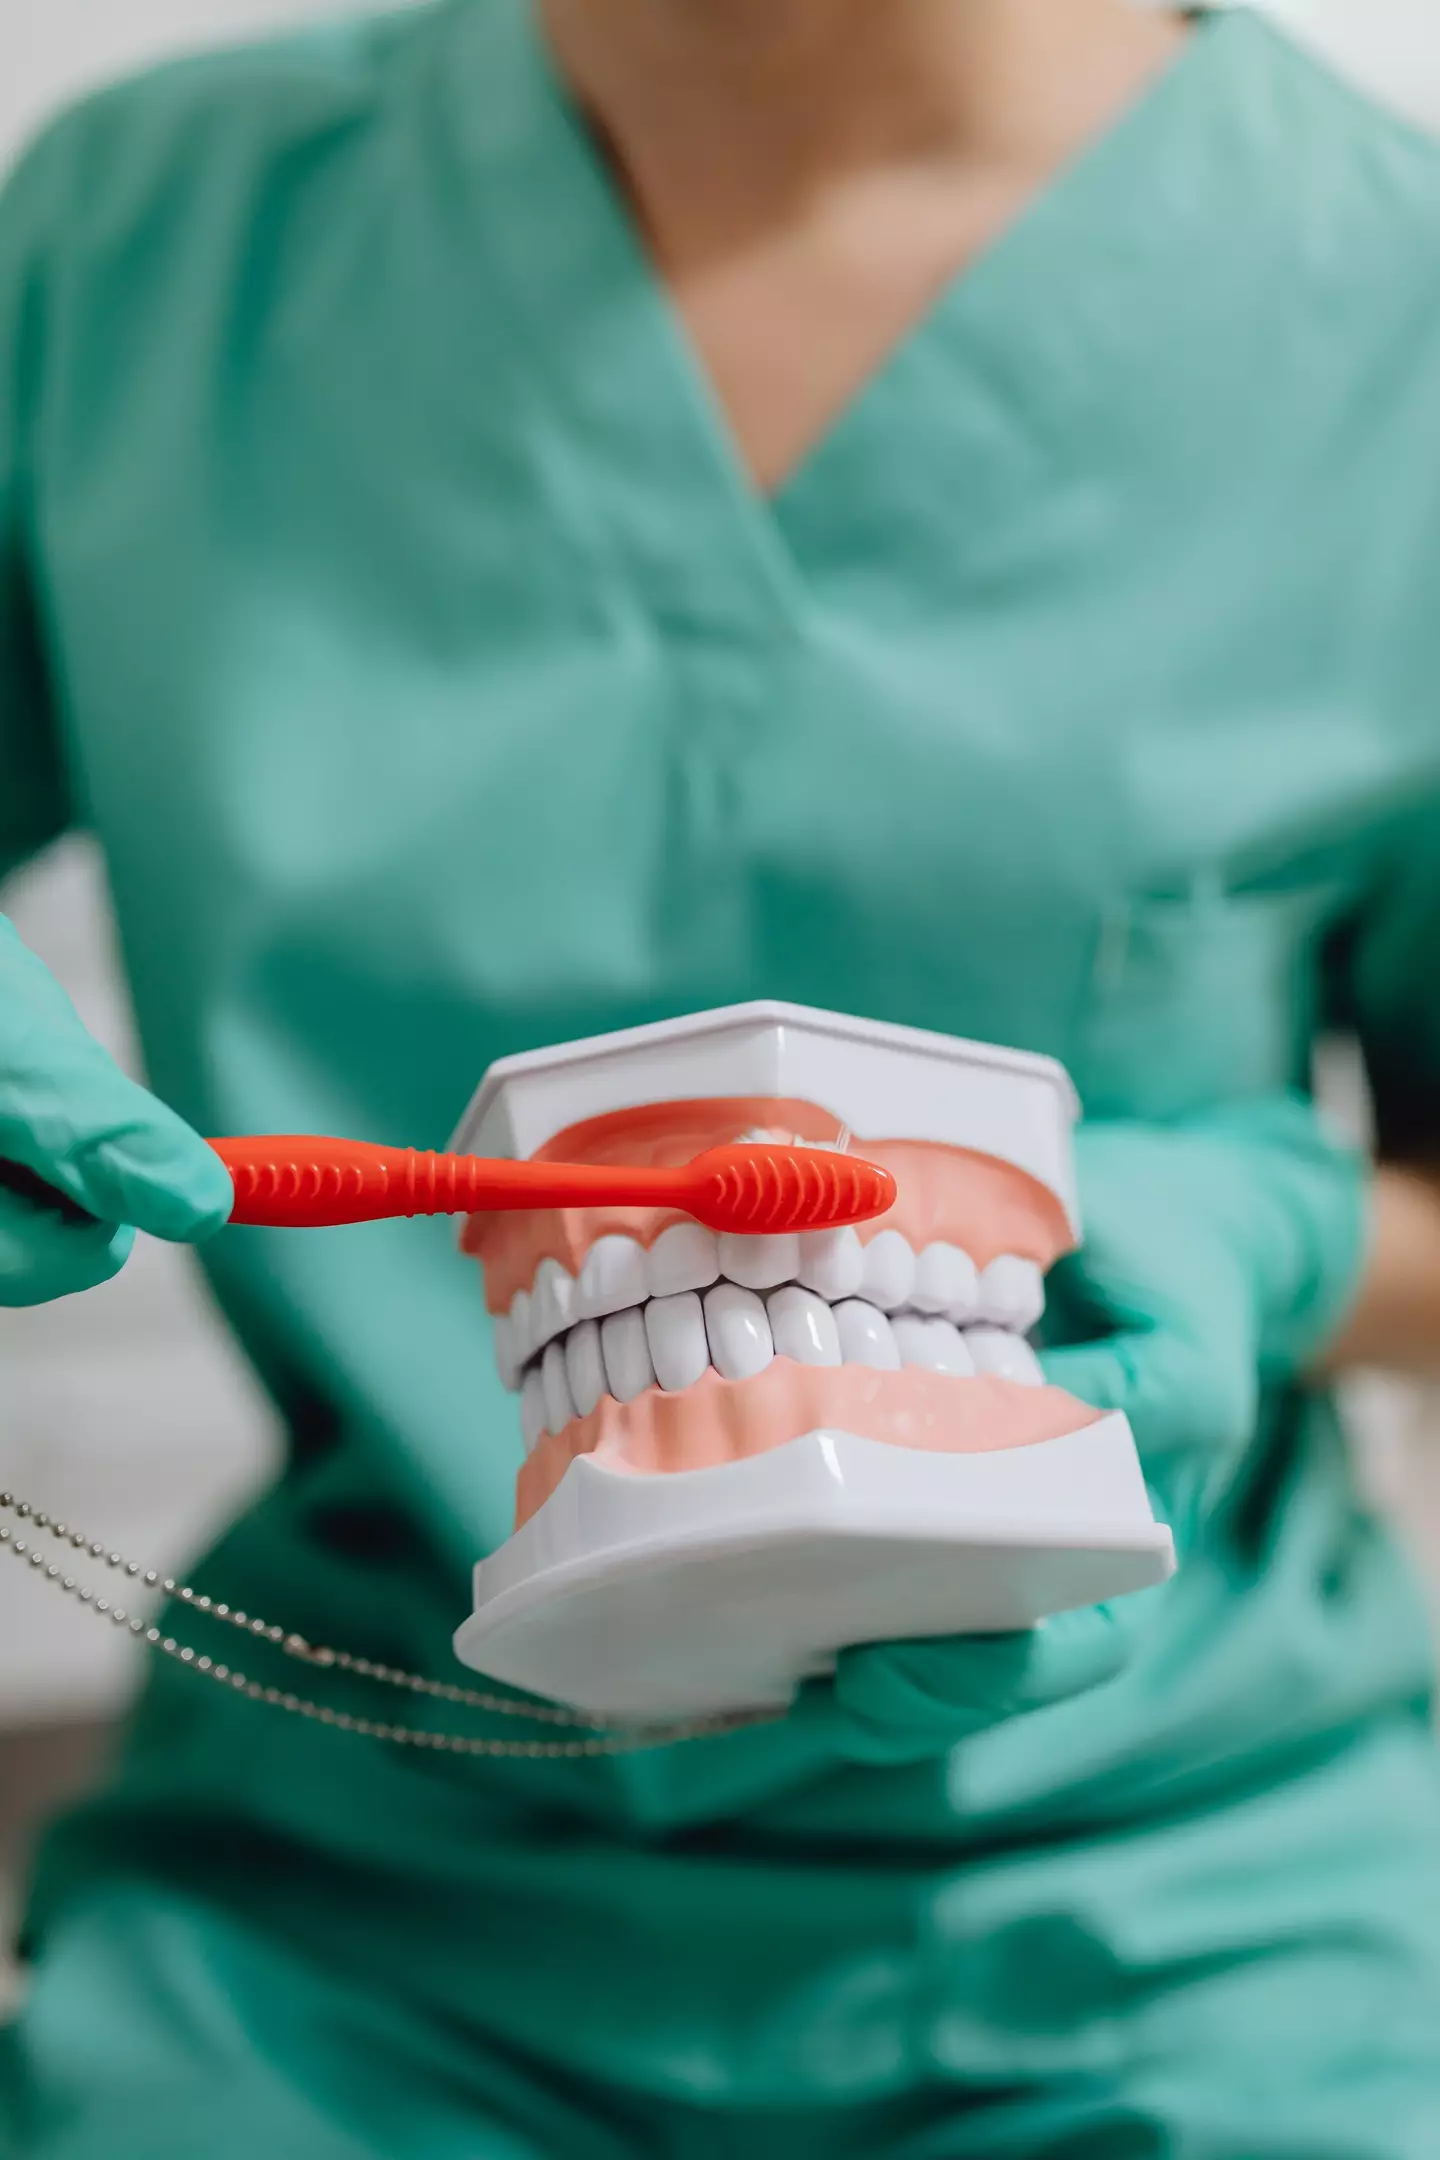 A dentist has revealed whether you should brush before or after breakfast.